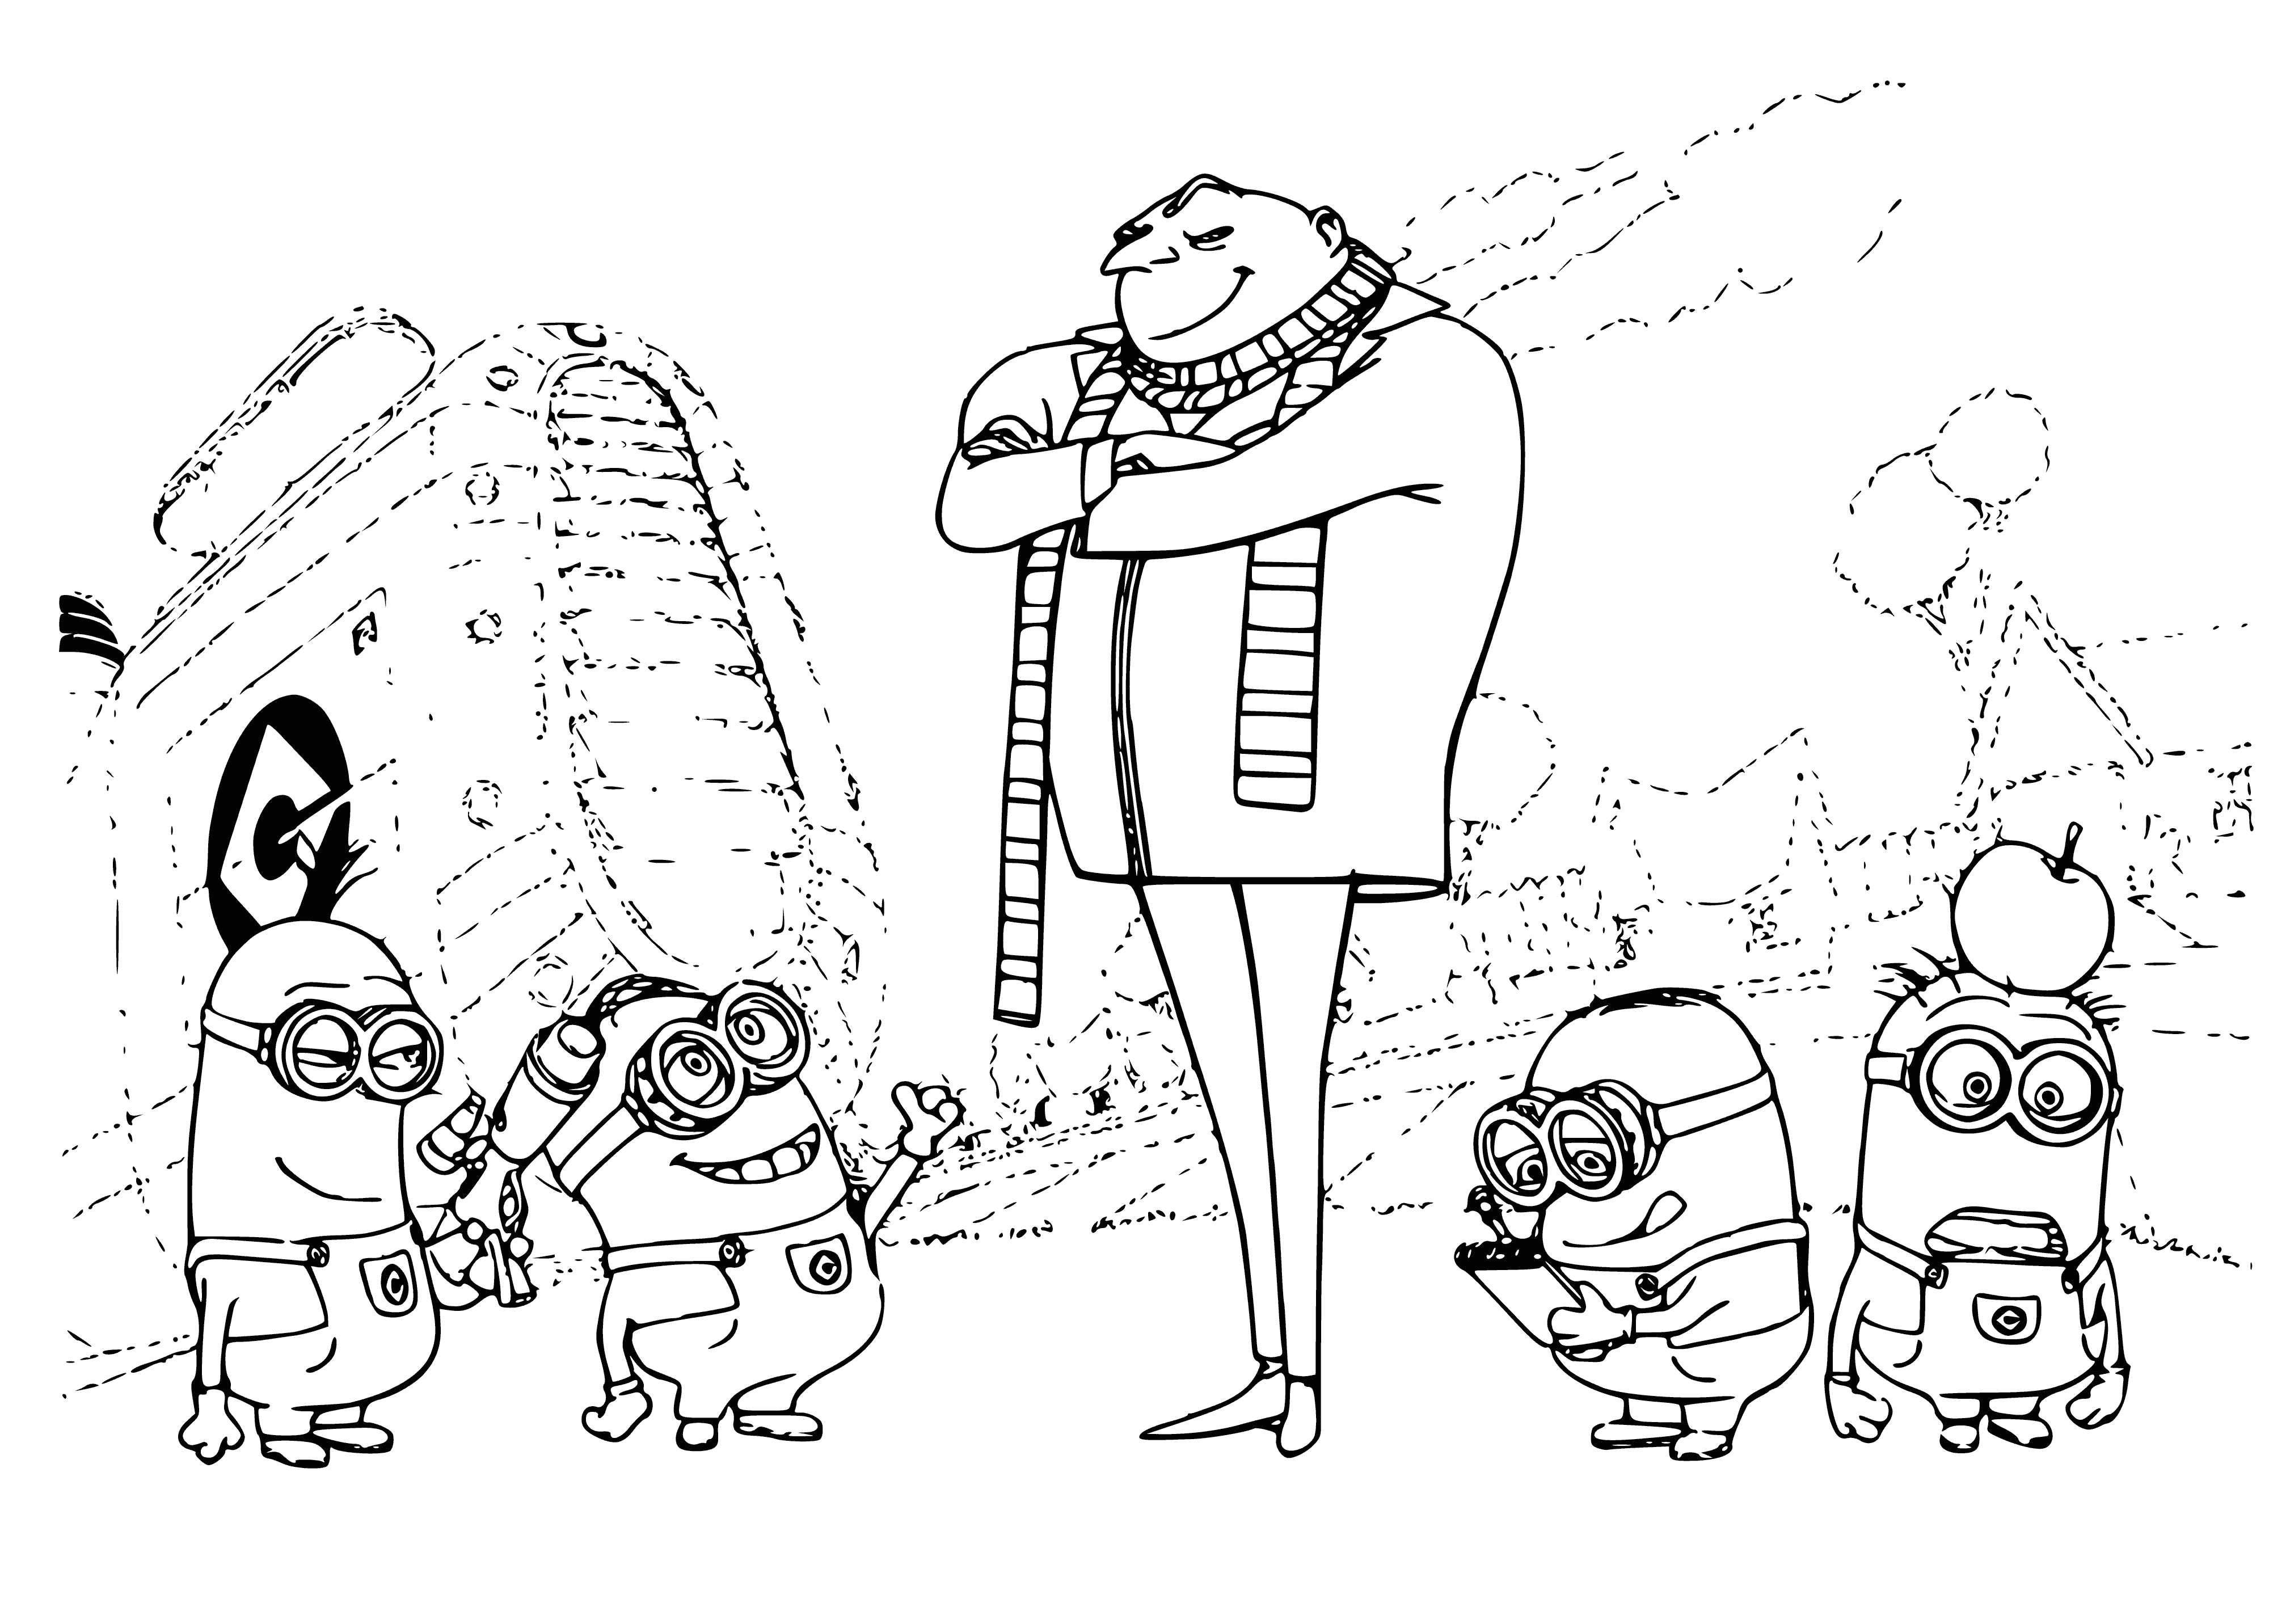 coloring page: Gru and 3 minions hold hands, grinning. They're all wearing color-coordinated outfits - Gru in black, minions in blue overalls w/blue eyes.